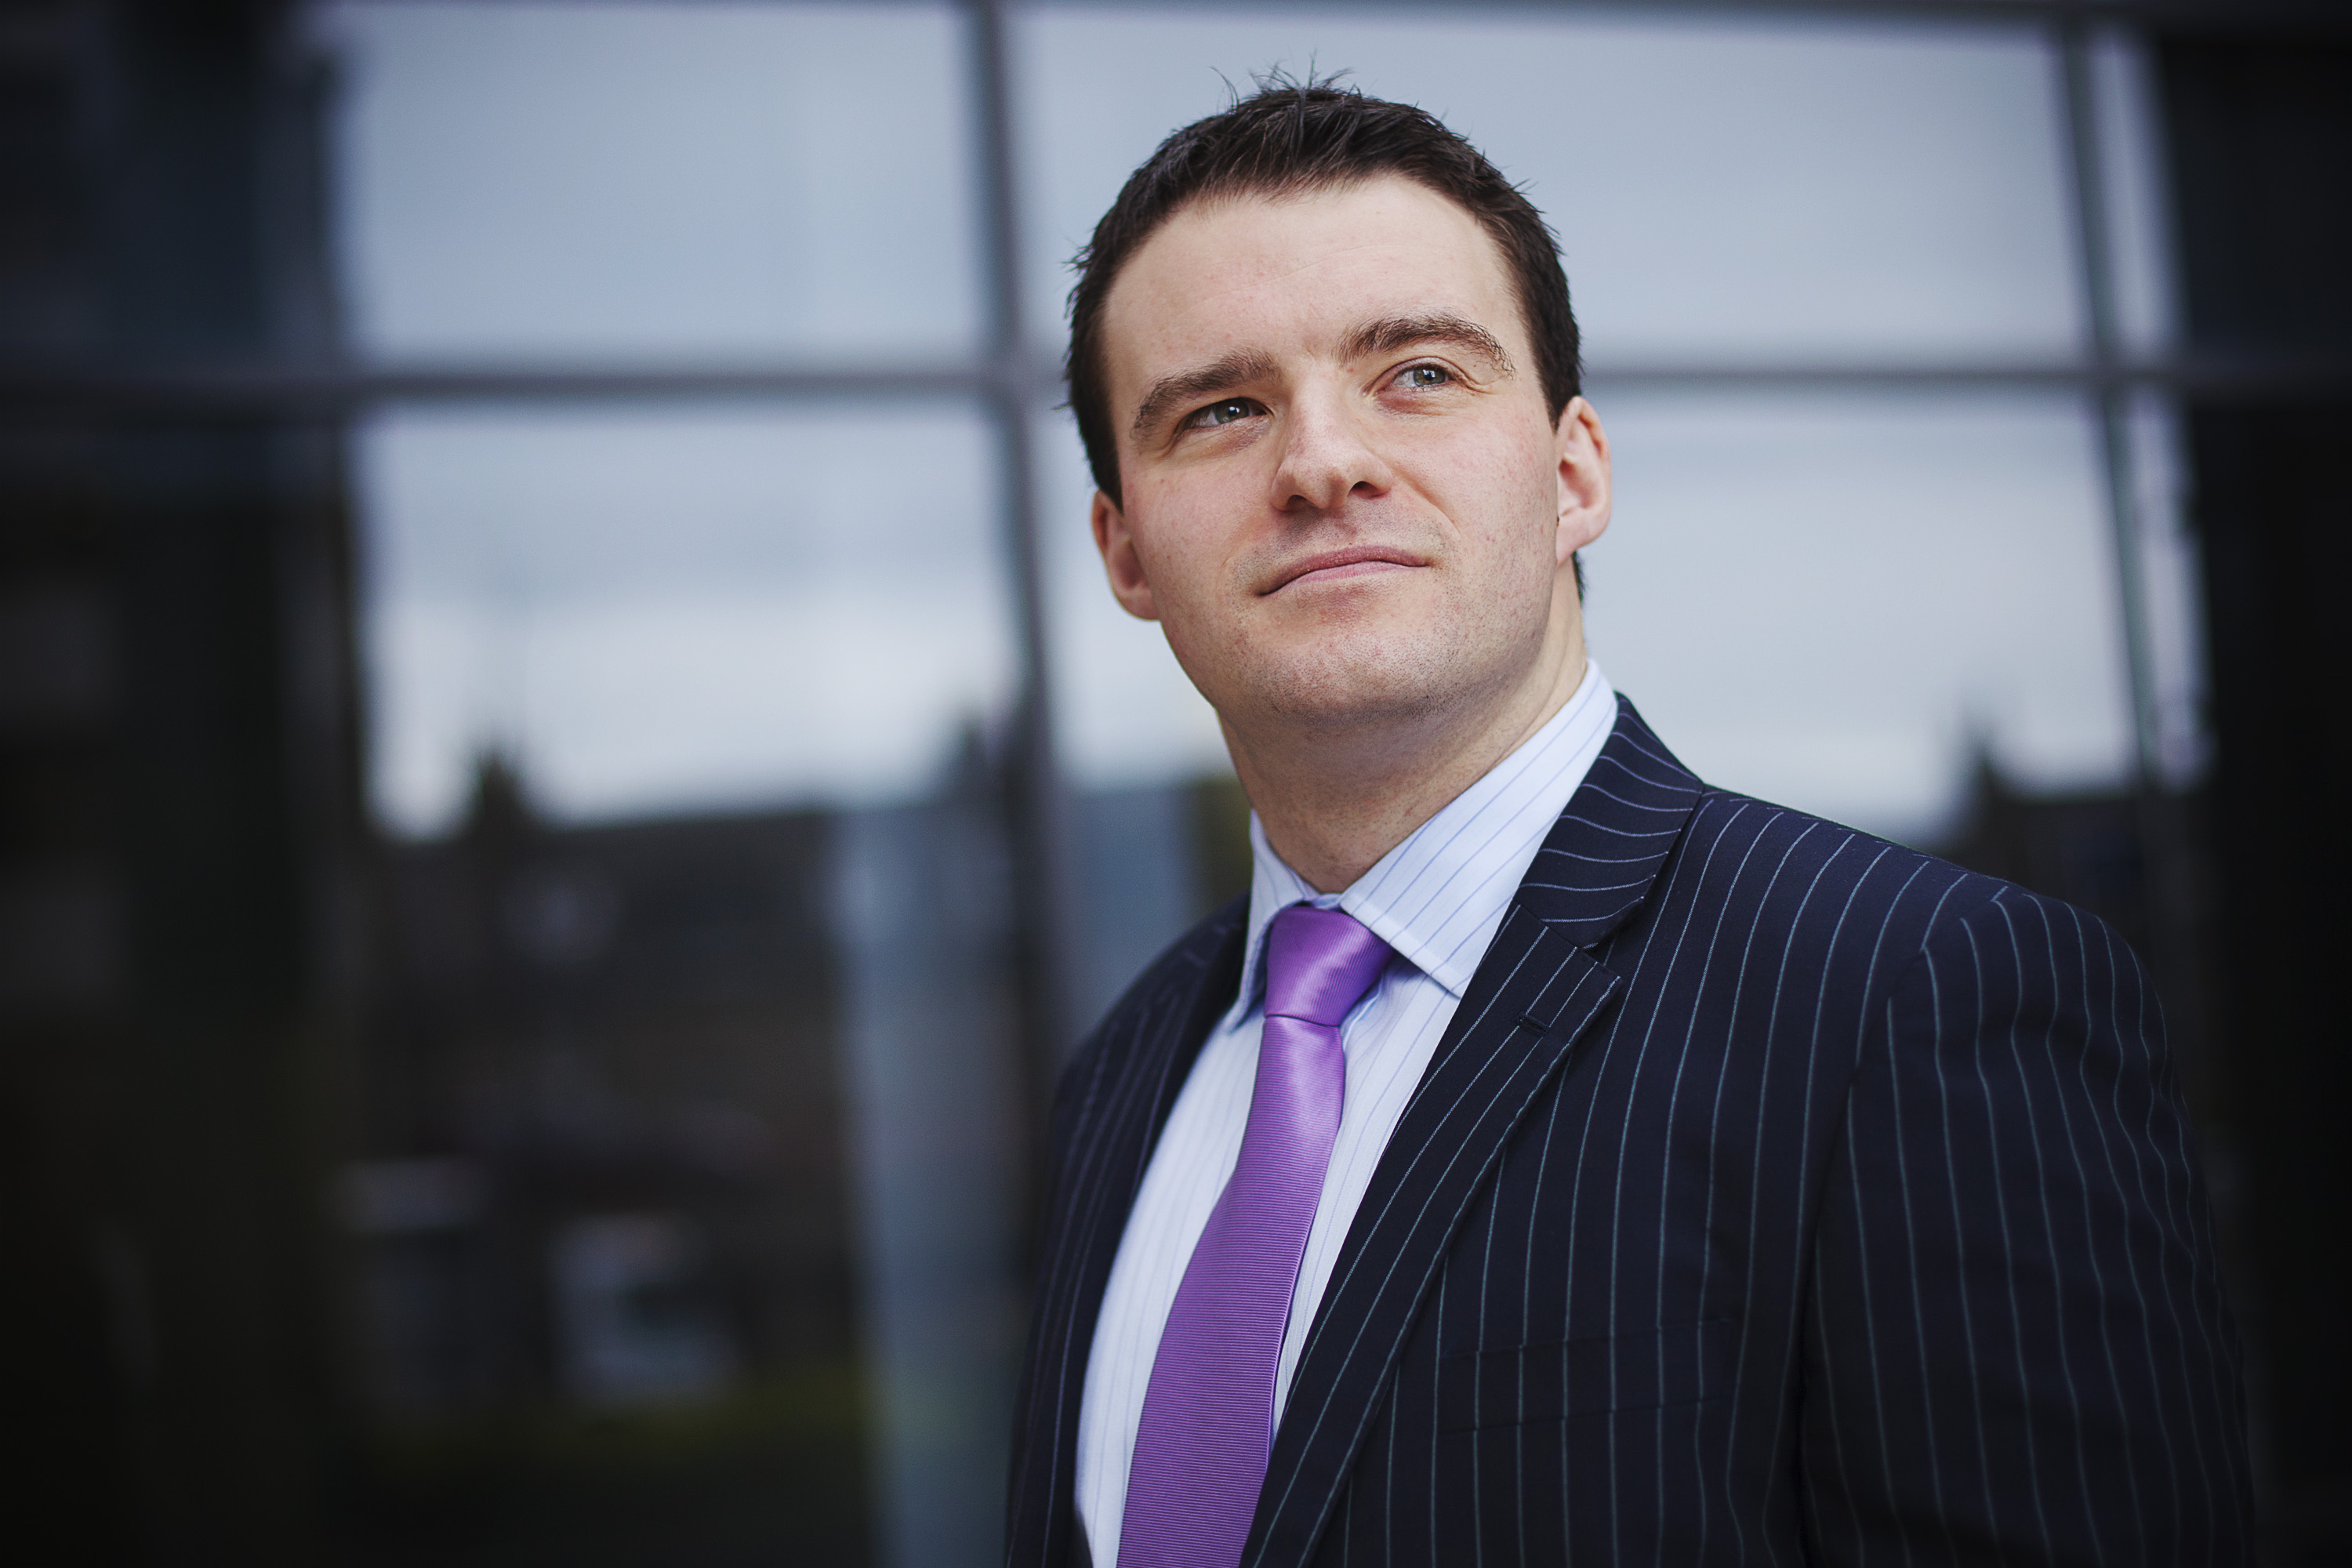 Construction law expert switches from Battersea to Granite City